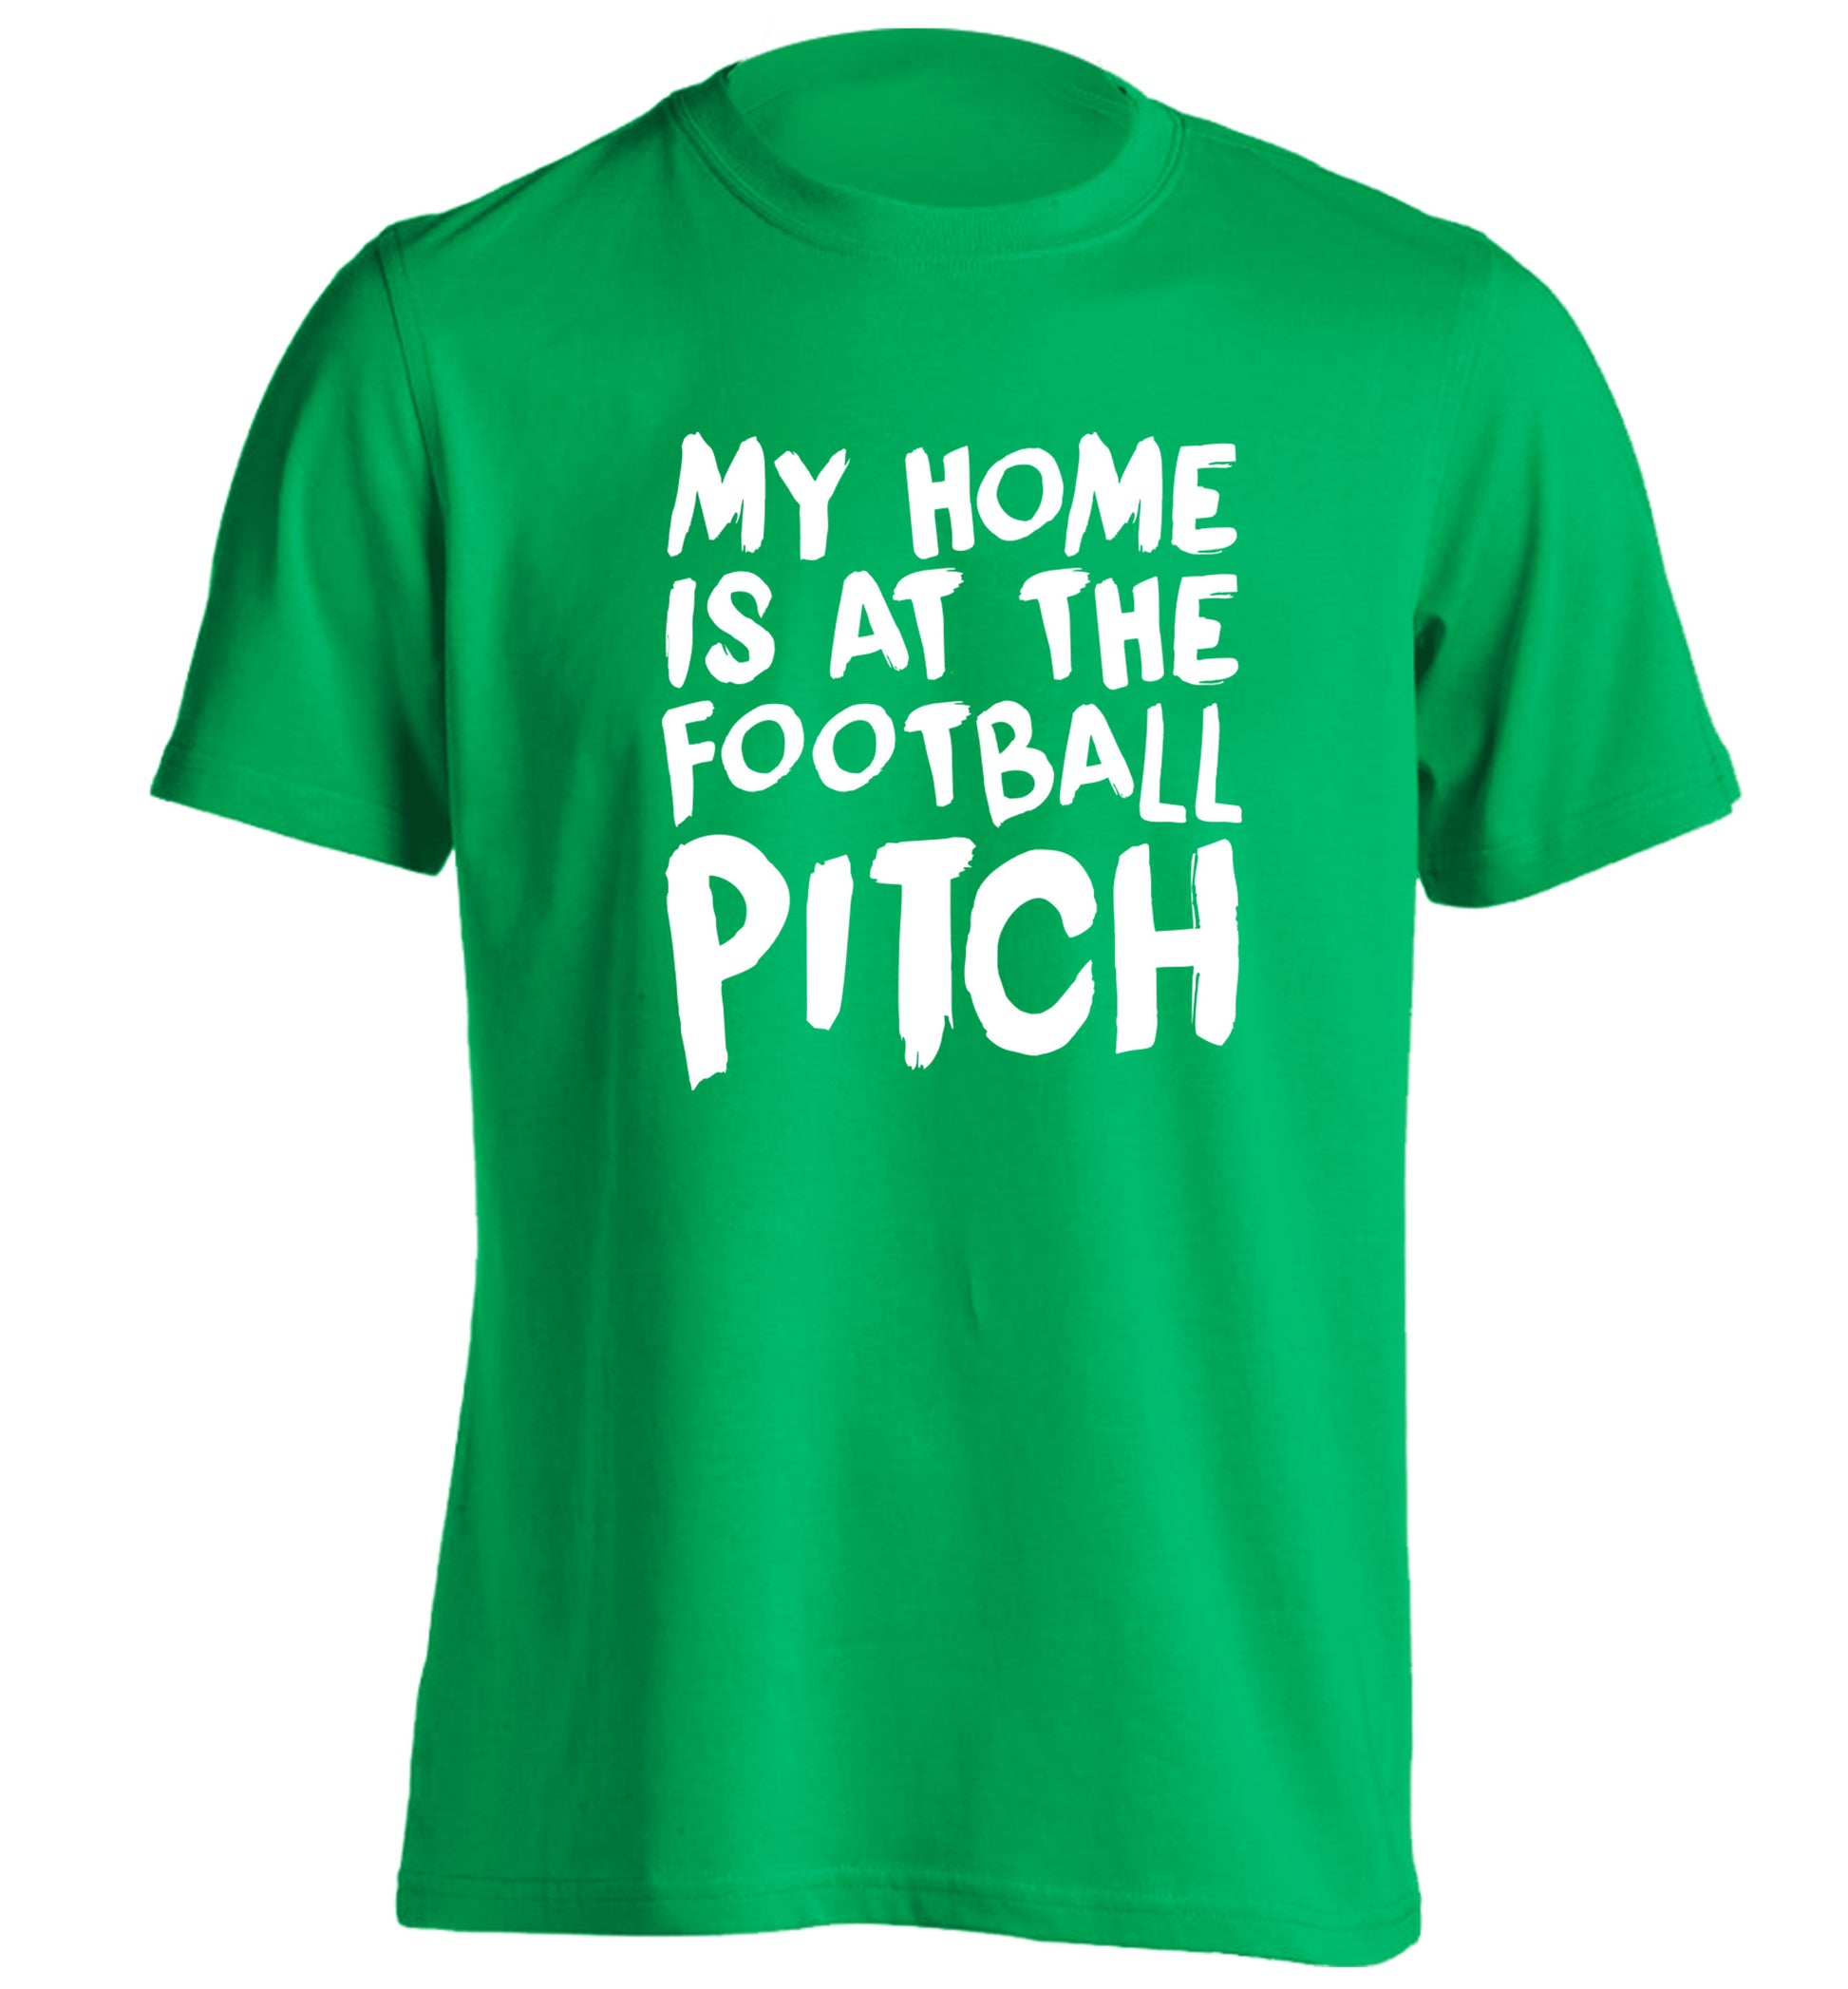 My home is at the football pitch adults unisex green Tshirt 2XL